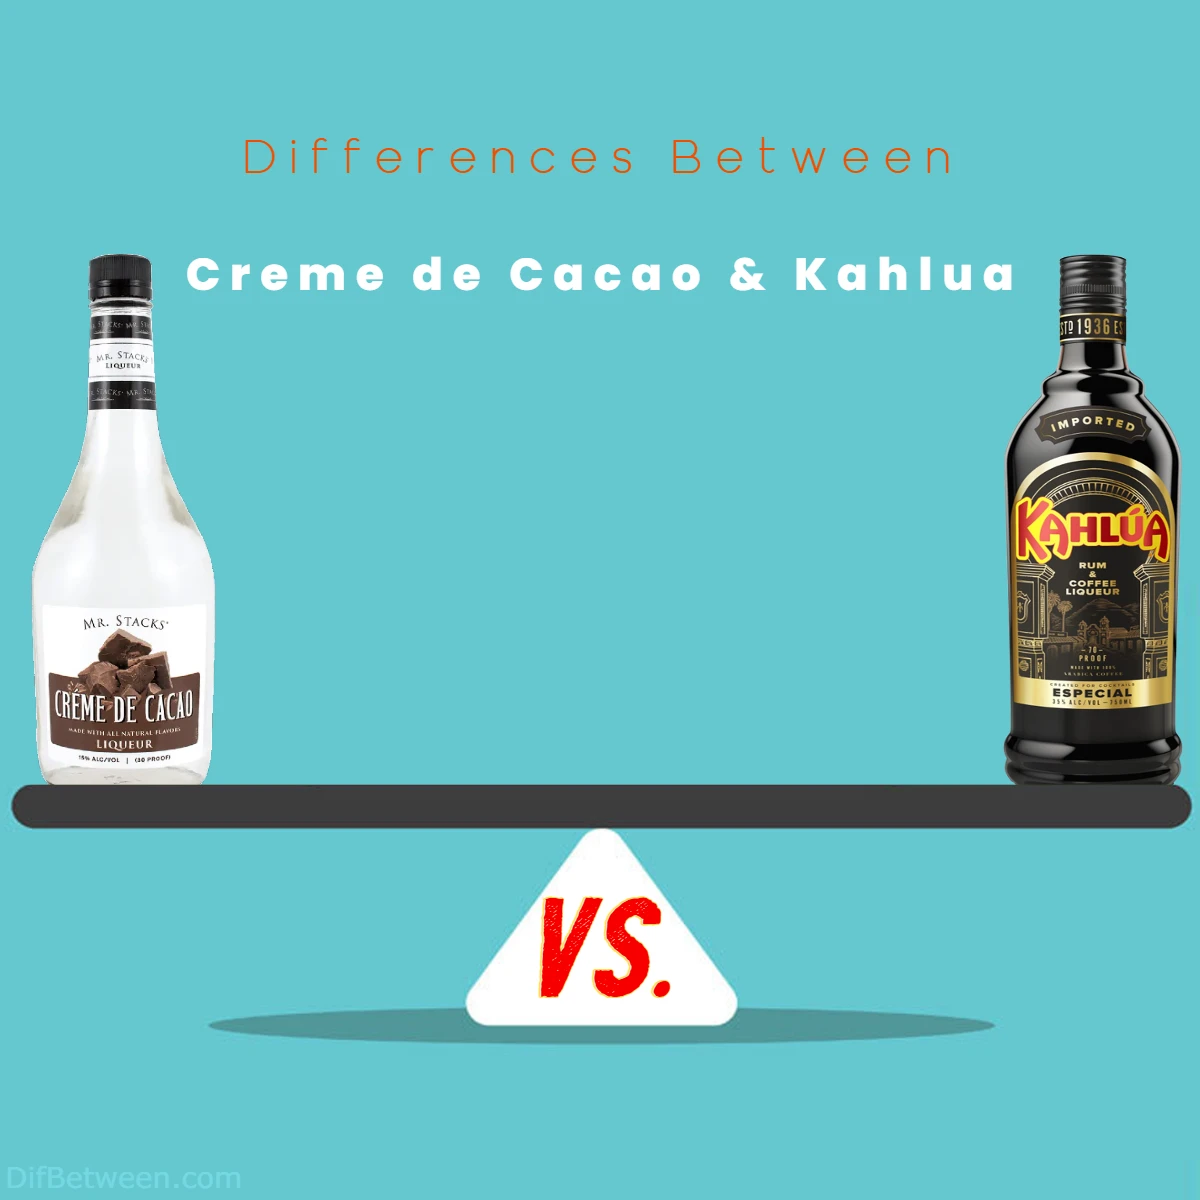 Differences Between Creme Kahlua and Creme de Cacao